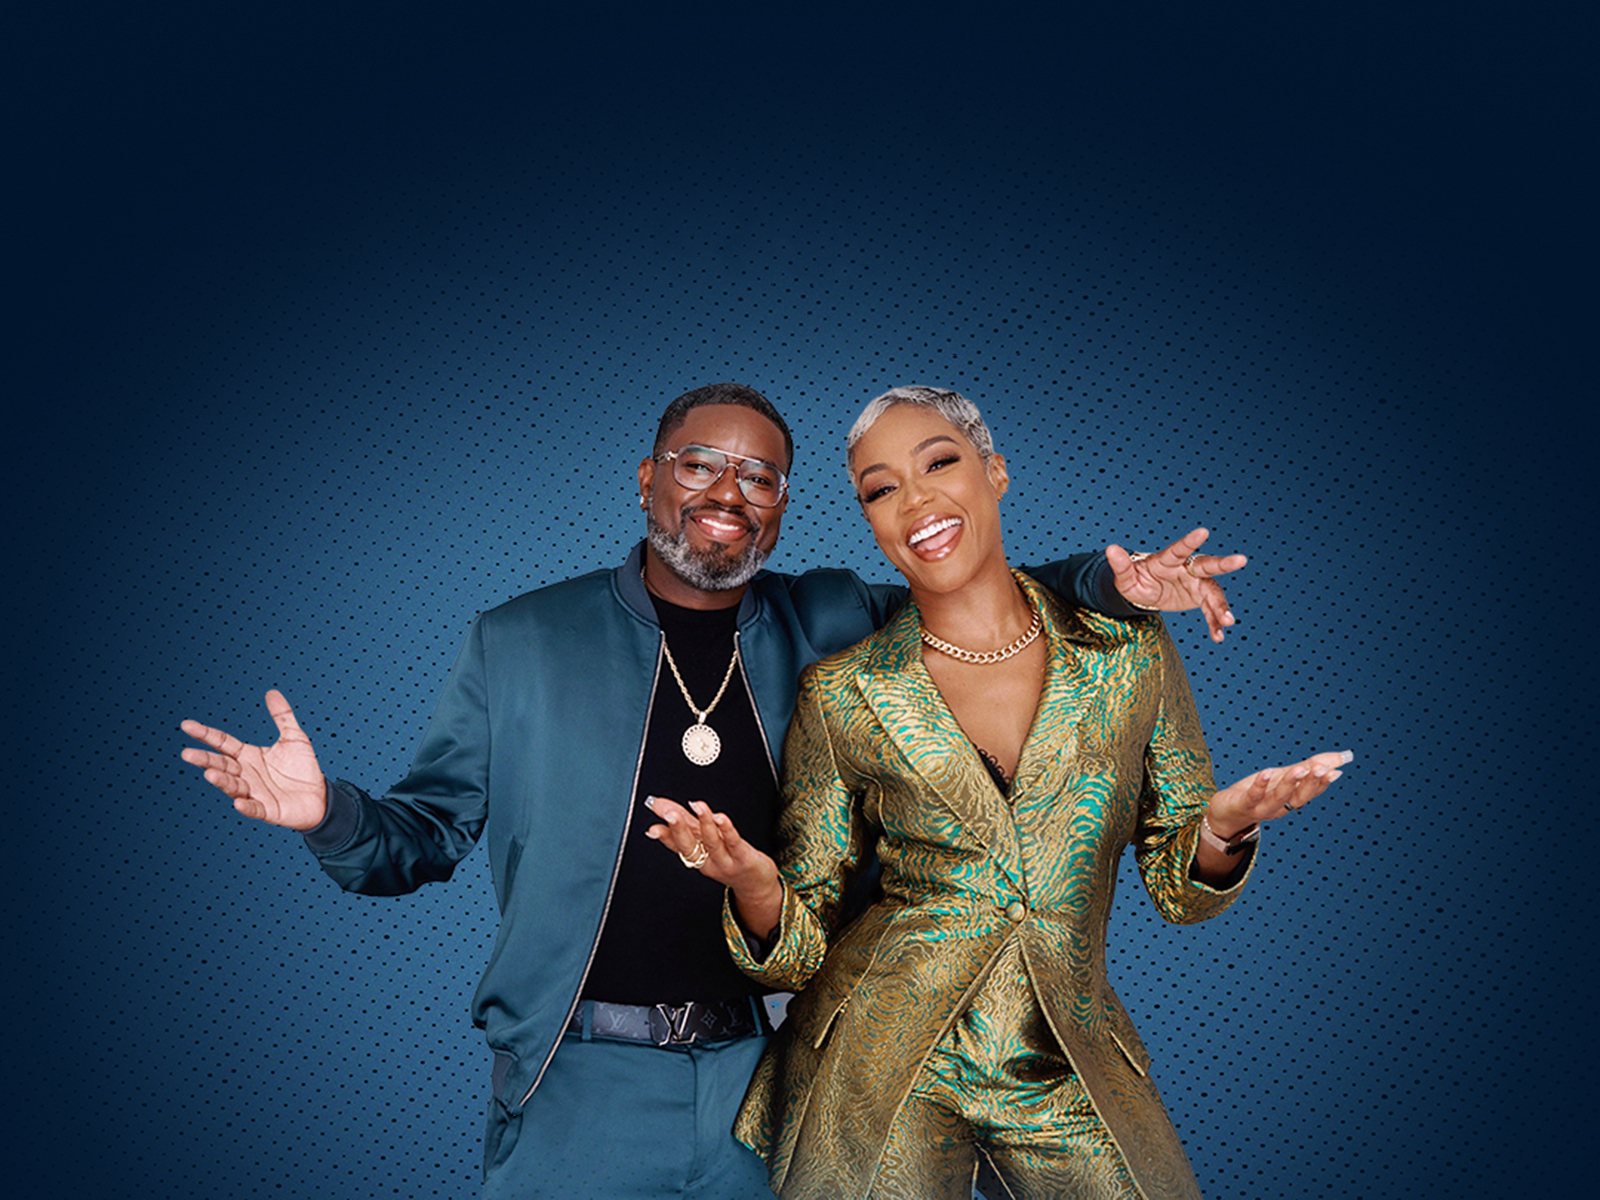 Tiffany Haddish & Lil Rel Howery The Best Friends Comedy Tour Tickets